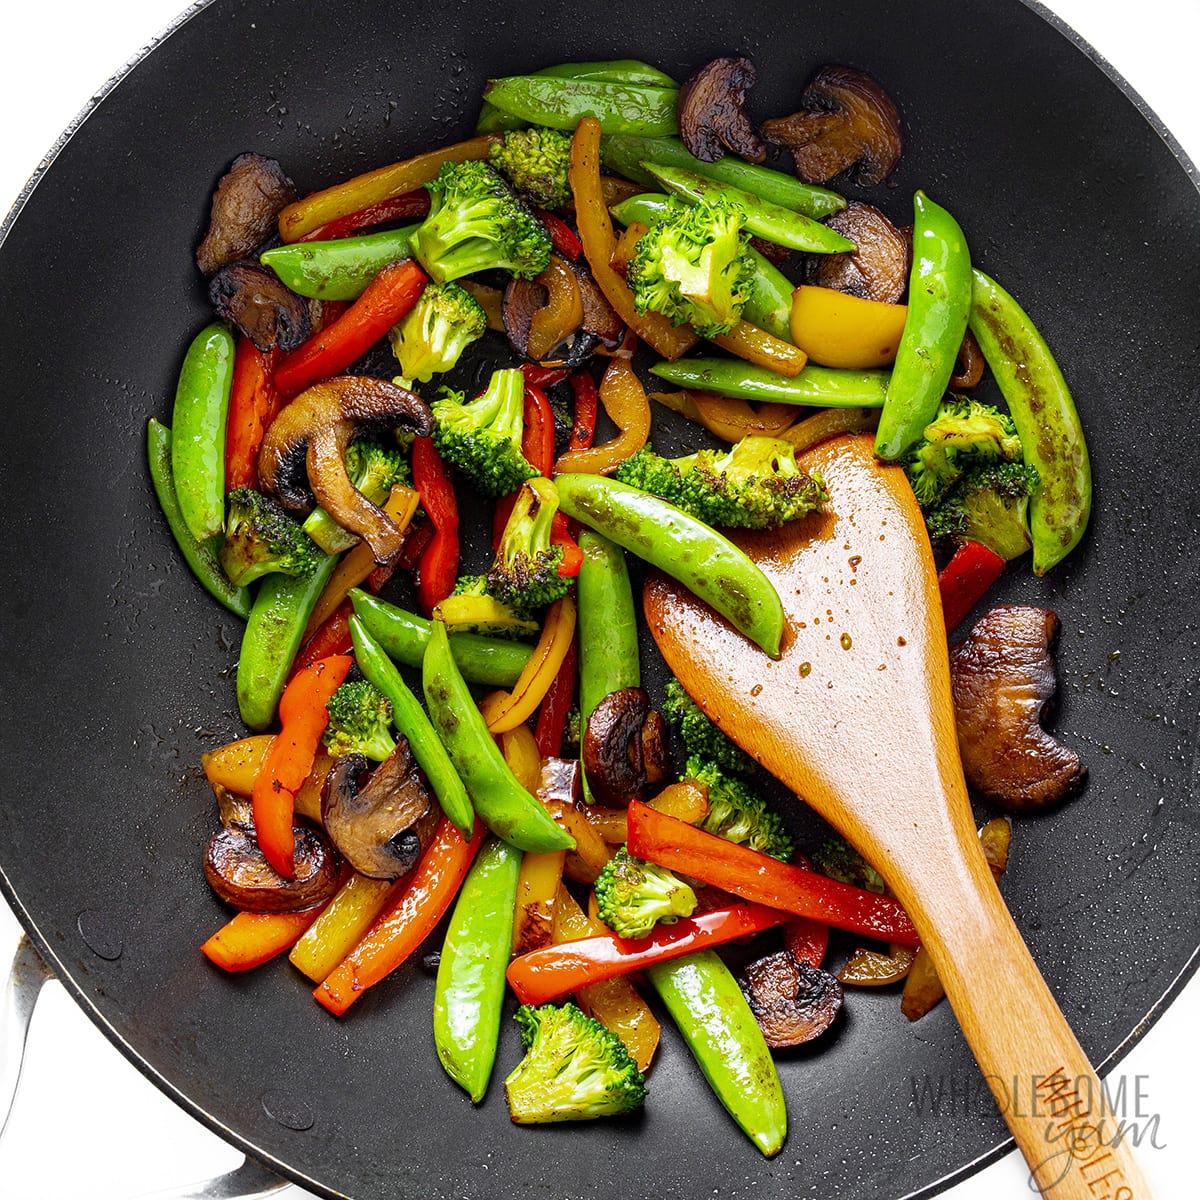 Vegetables in a wok stirred with a wooden spoon. 